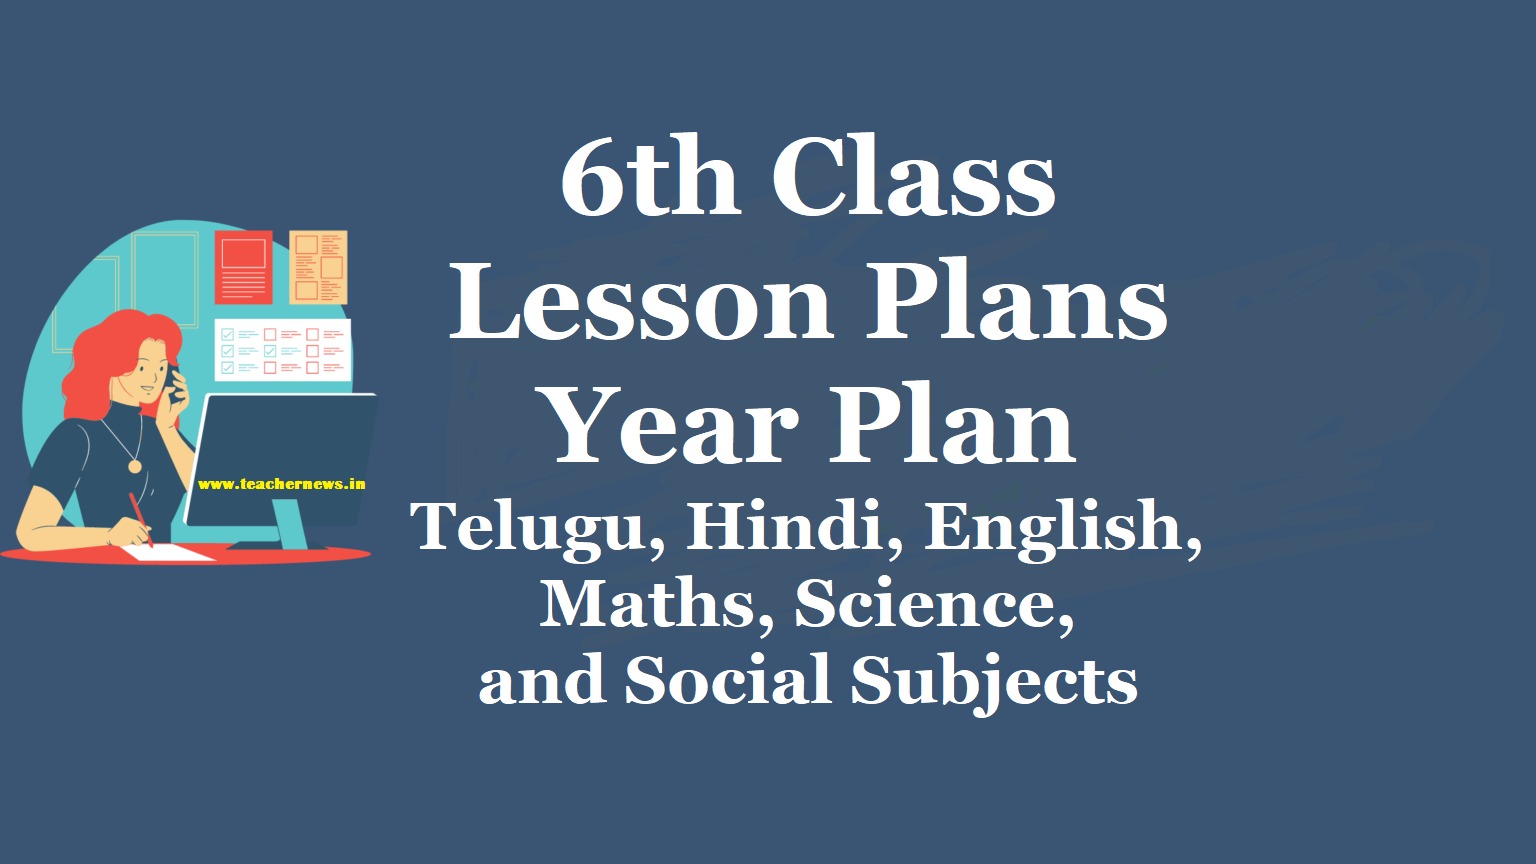 AP 6th Class Lesson Plans & Year Plans 2023 for Telugu, Hindi, English, Maths, Science, and Social Subjects